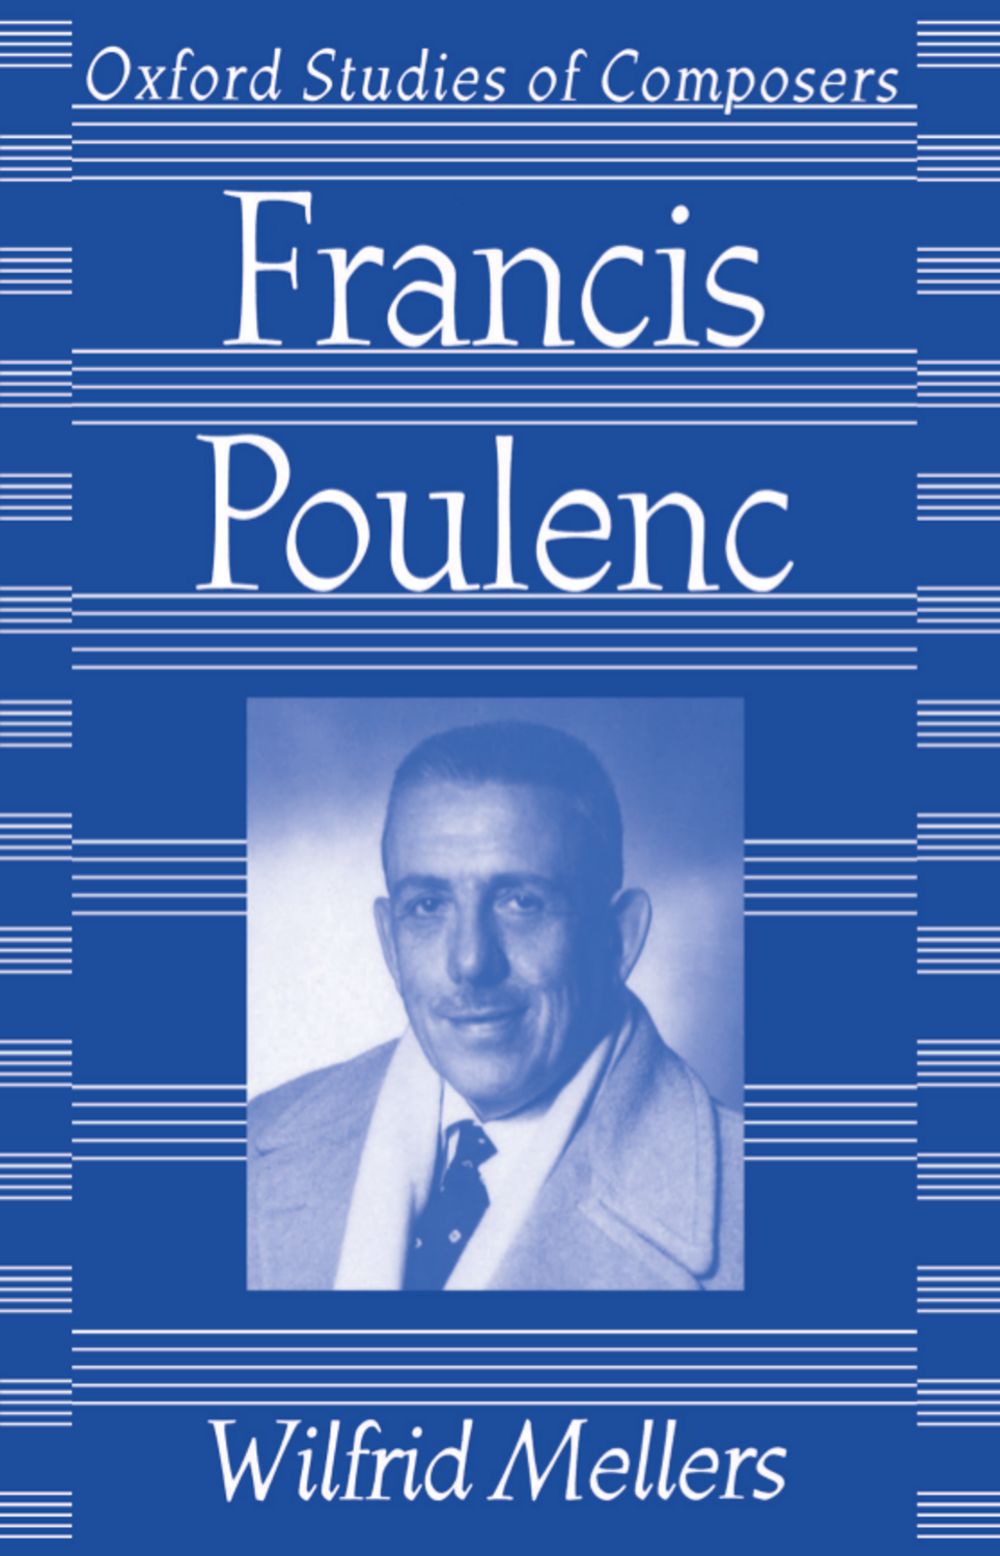 Mellers Francis Poulenc Paperback Sheet Music Songbook